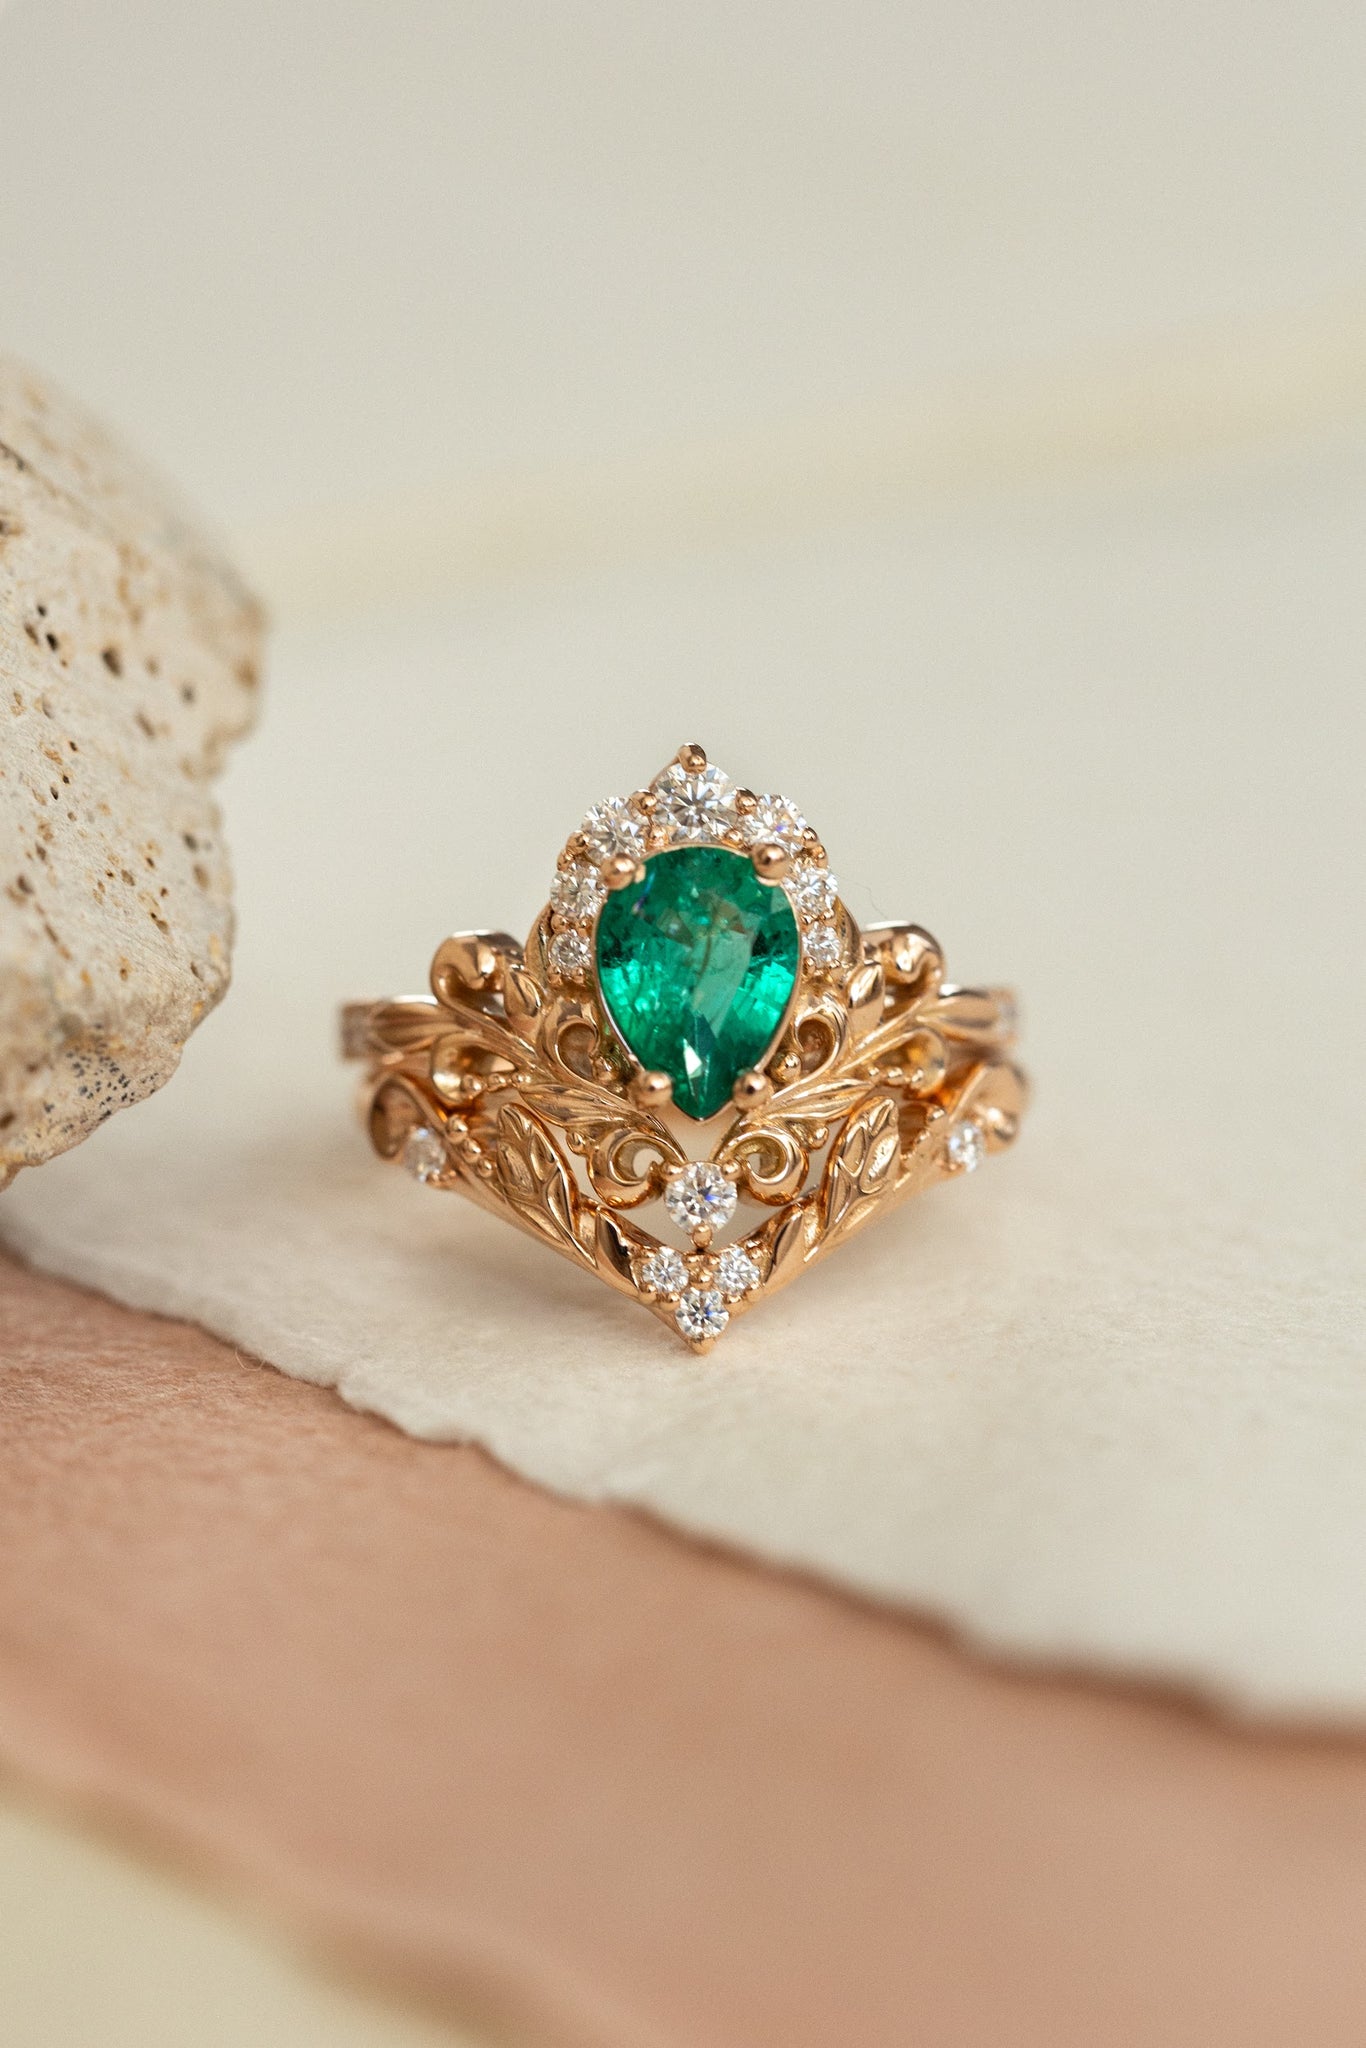 Emerald baroque style engagement ring, rose gold engagement ring with diamonds / Sophie - Eden Garden Jewelry™